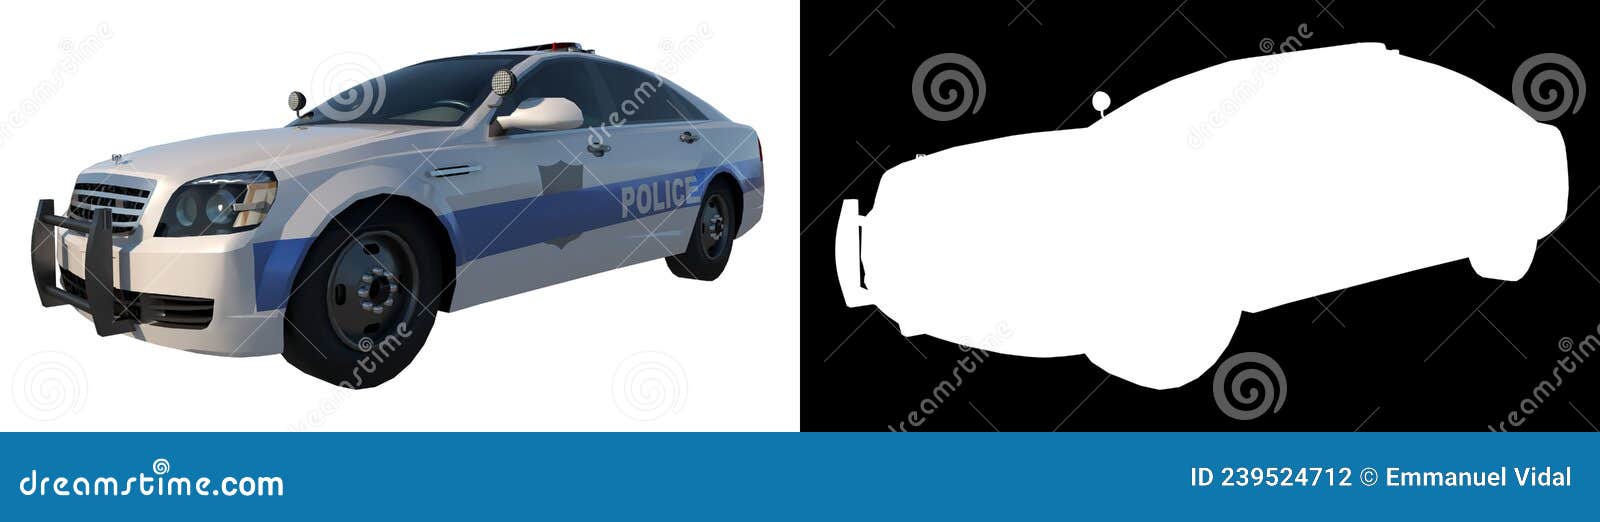 police patrol 1-perspective f view white background alpha png 3d rendering ilustracion 3d